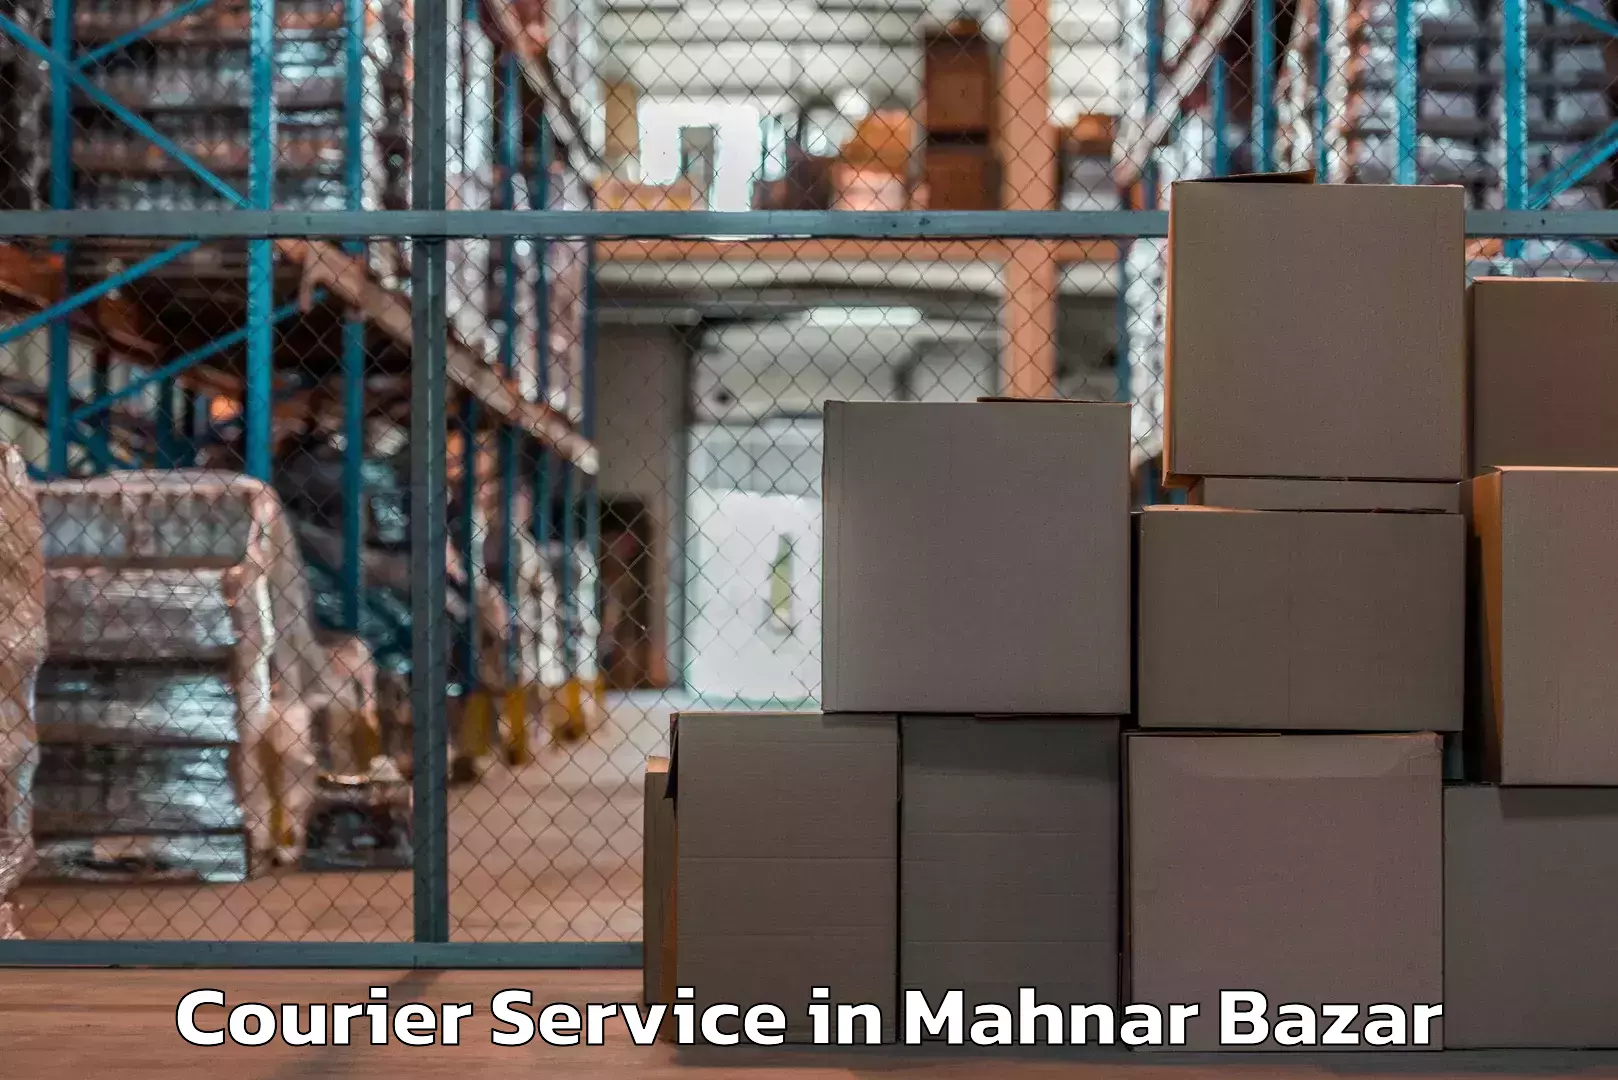 Express package services in Mahnar Bazar